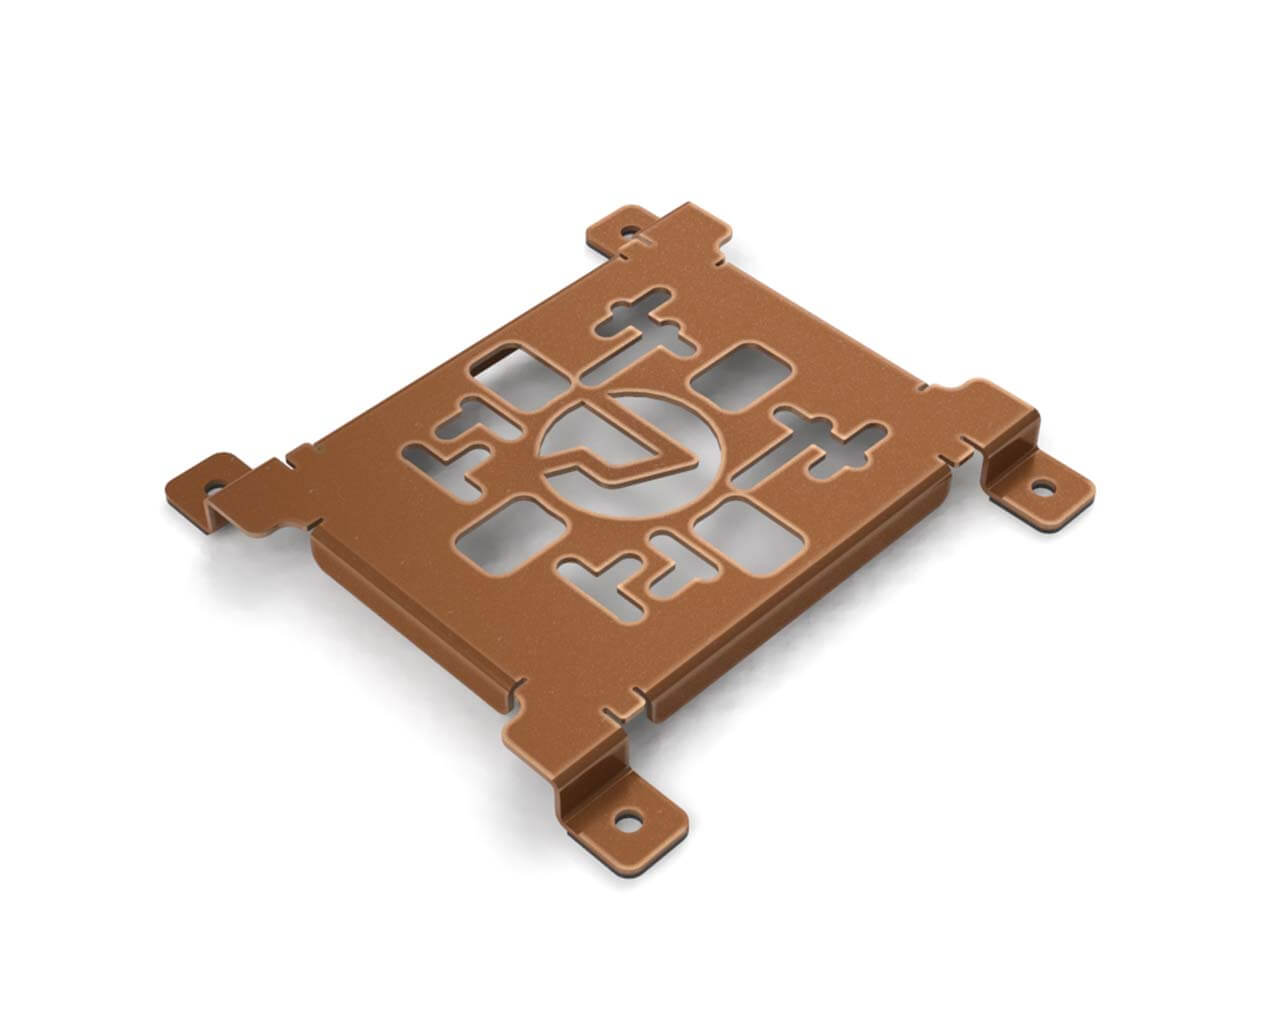 PrimoChill SX Spider Mount Bracket - 120mm Series - PrimoChill - KEEPING IT COOL Copper